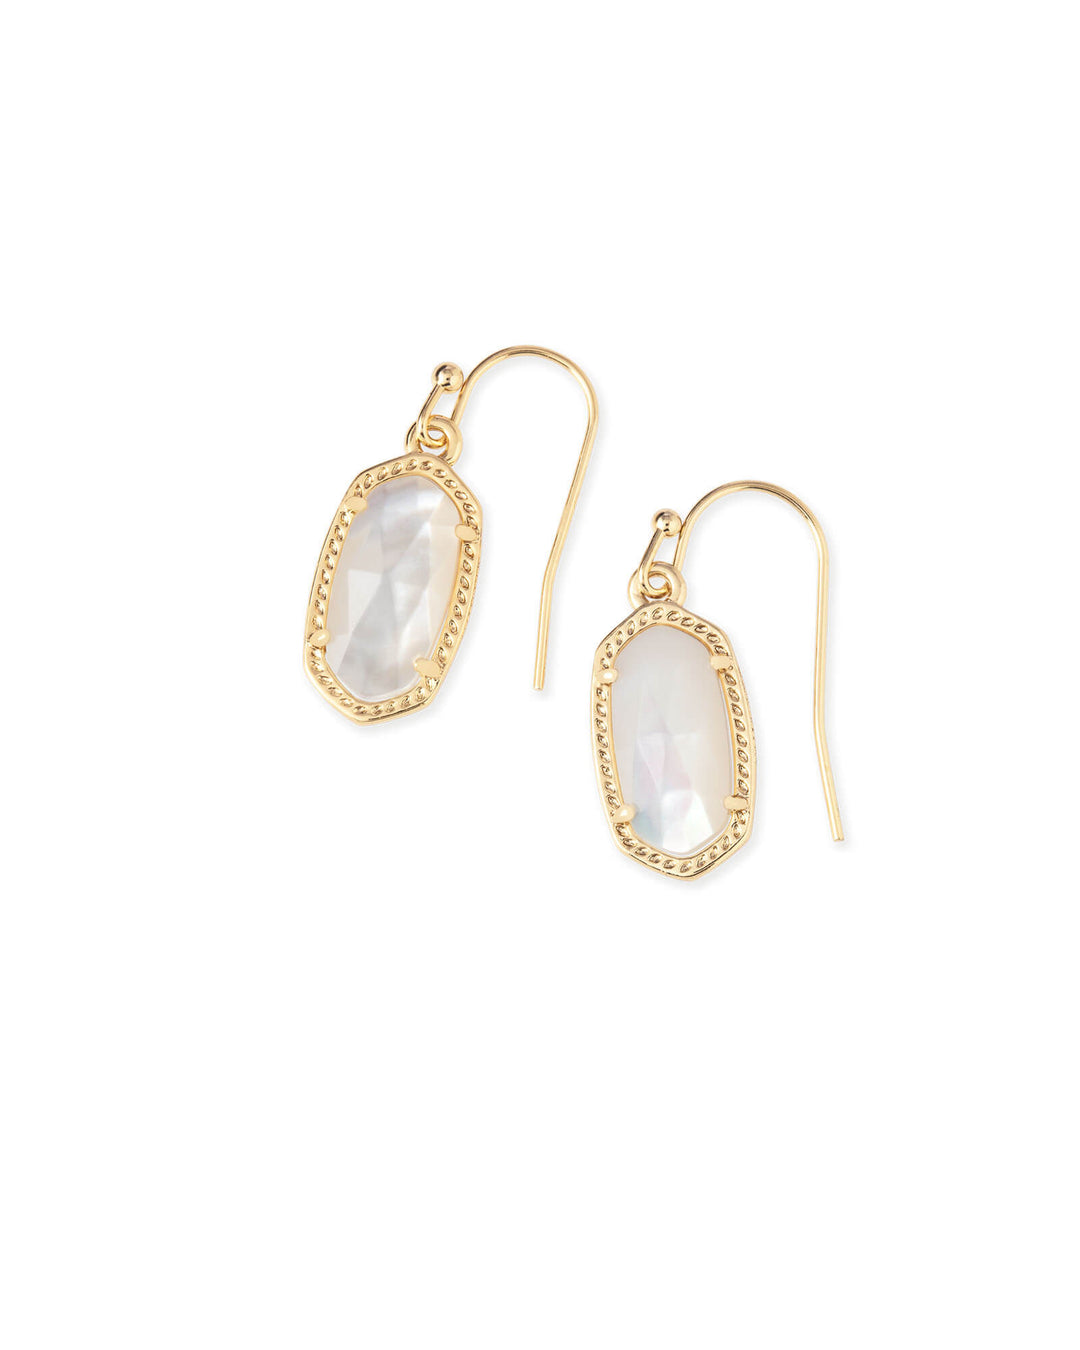 LEE GOLD DROP EARRINGS - GOLD MOTHER OF PEARL